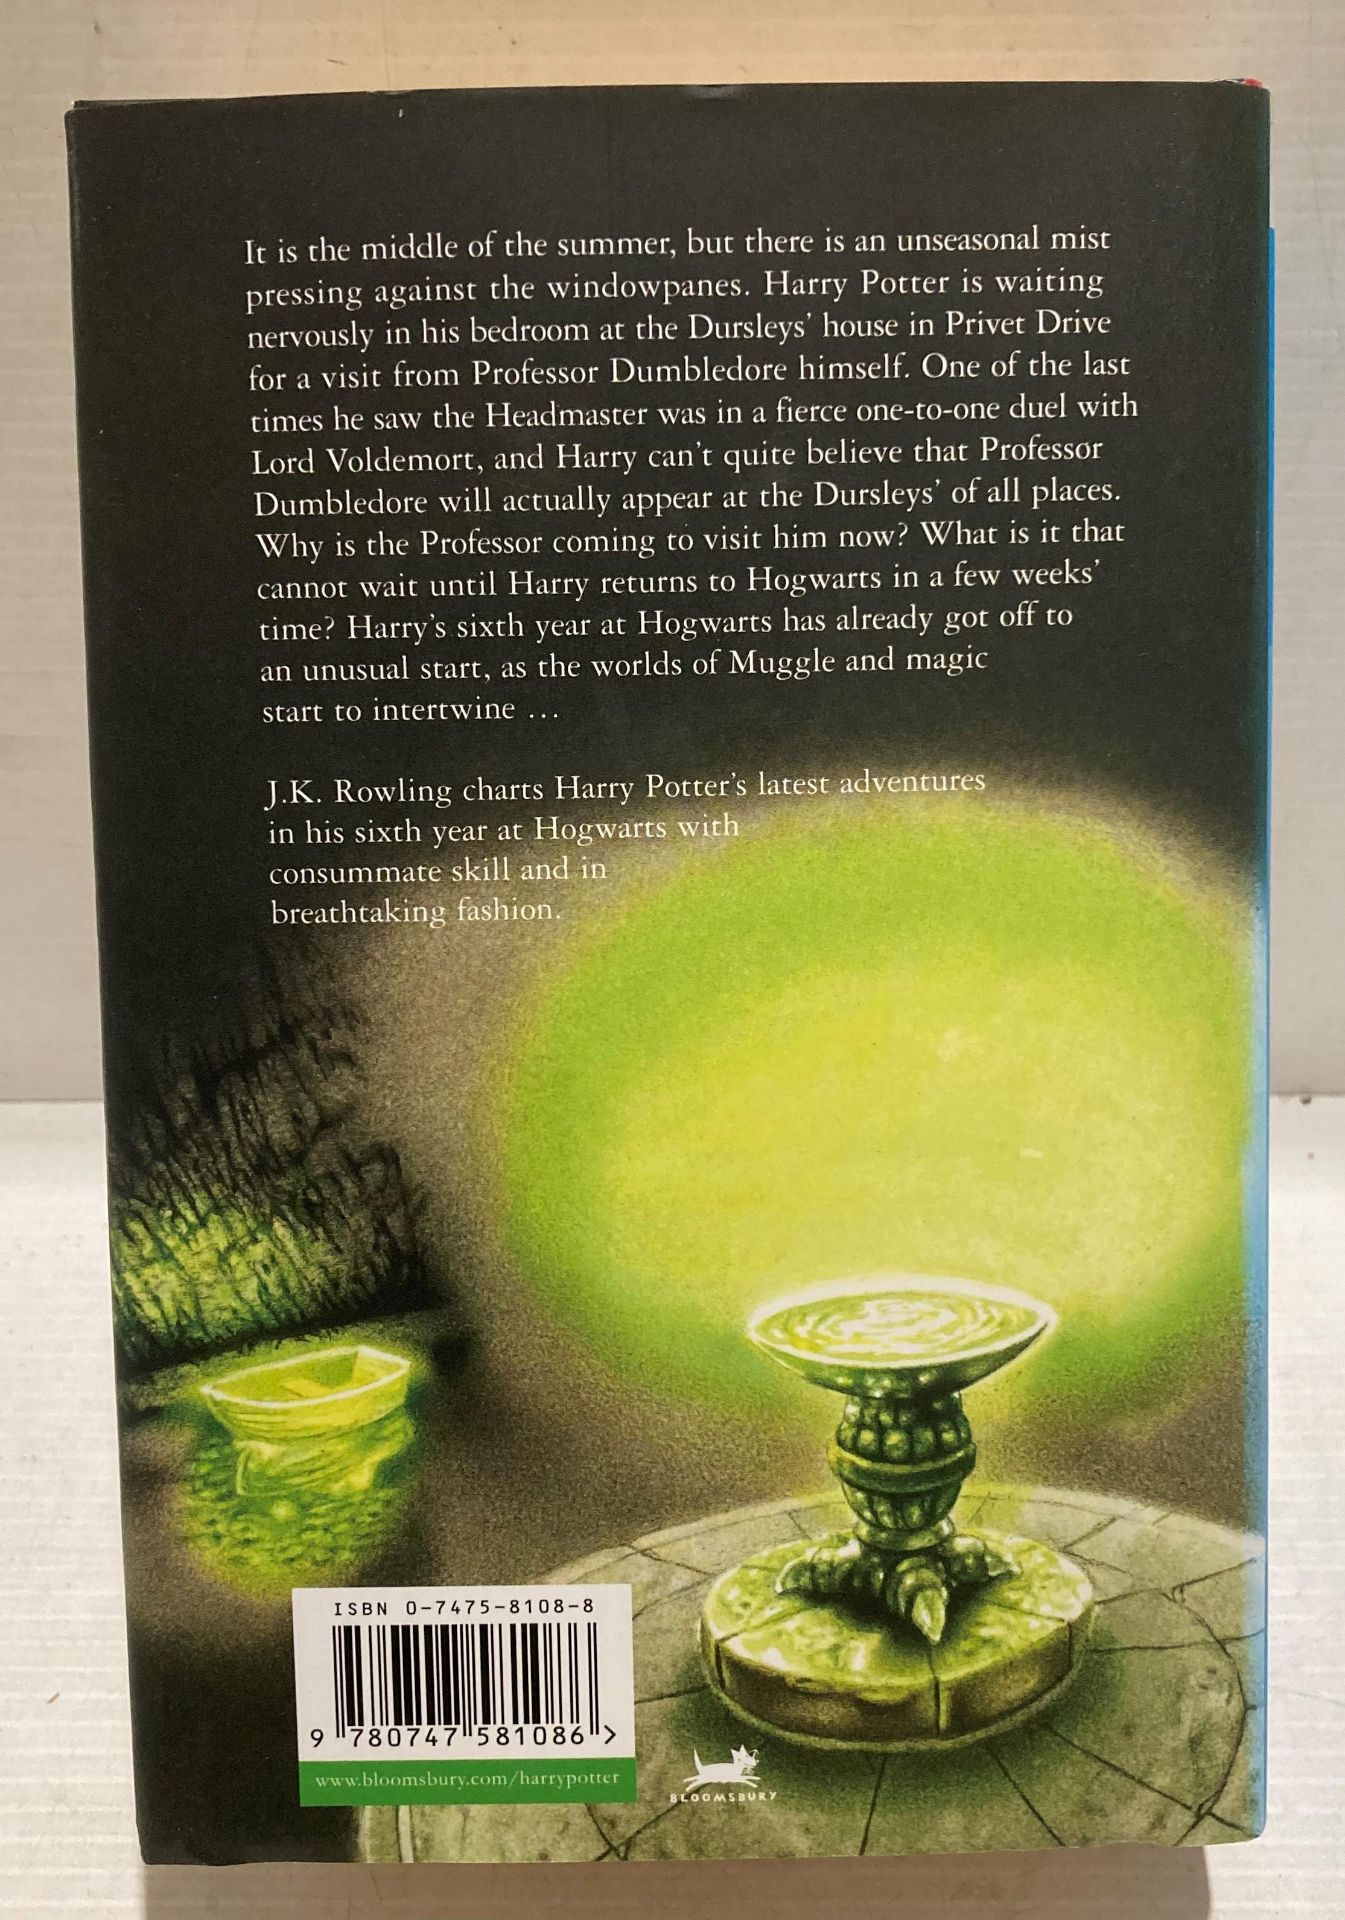 J K Rowling 'Harry Potter and the Half-Blood Prince', first edition, published by Bloomsbury 2005, - Image 3 of 3